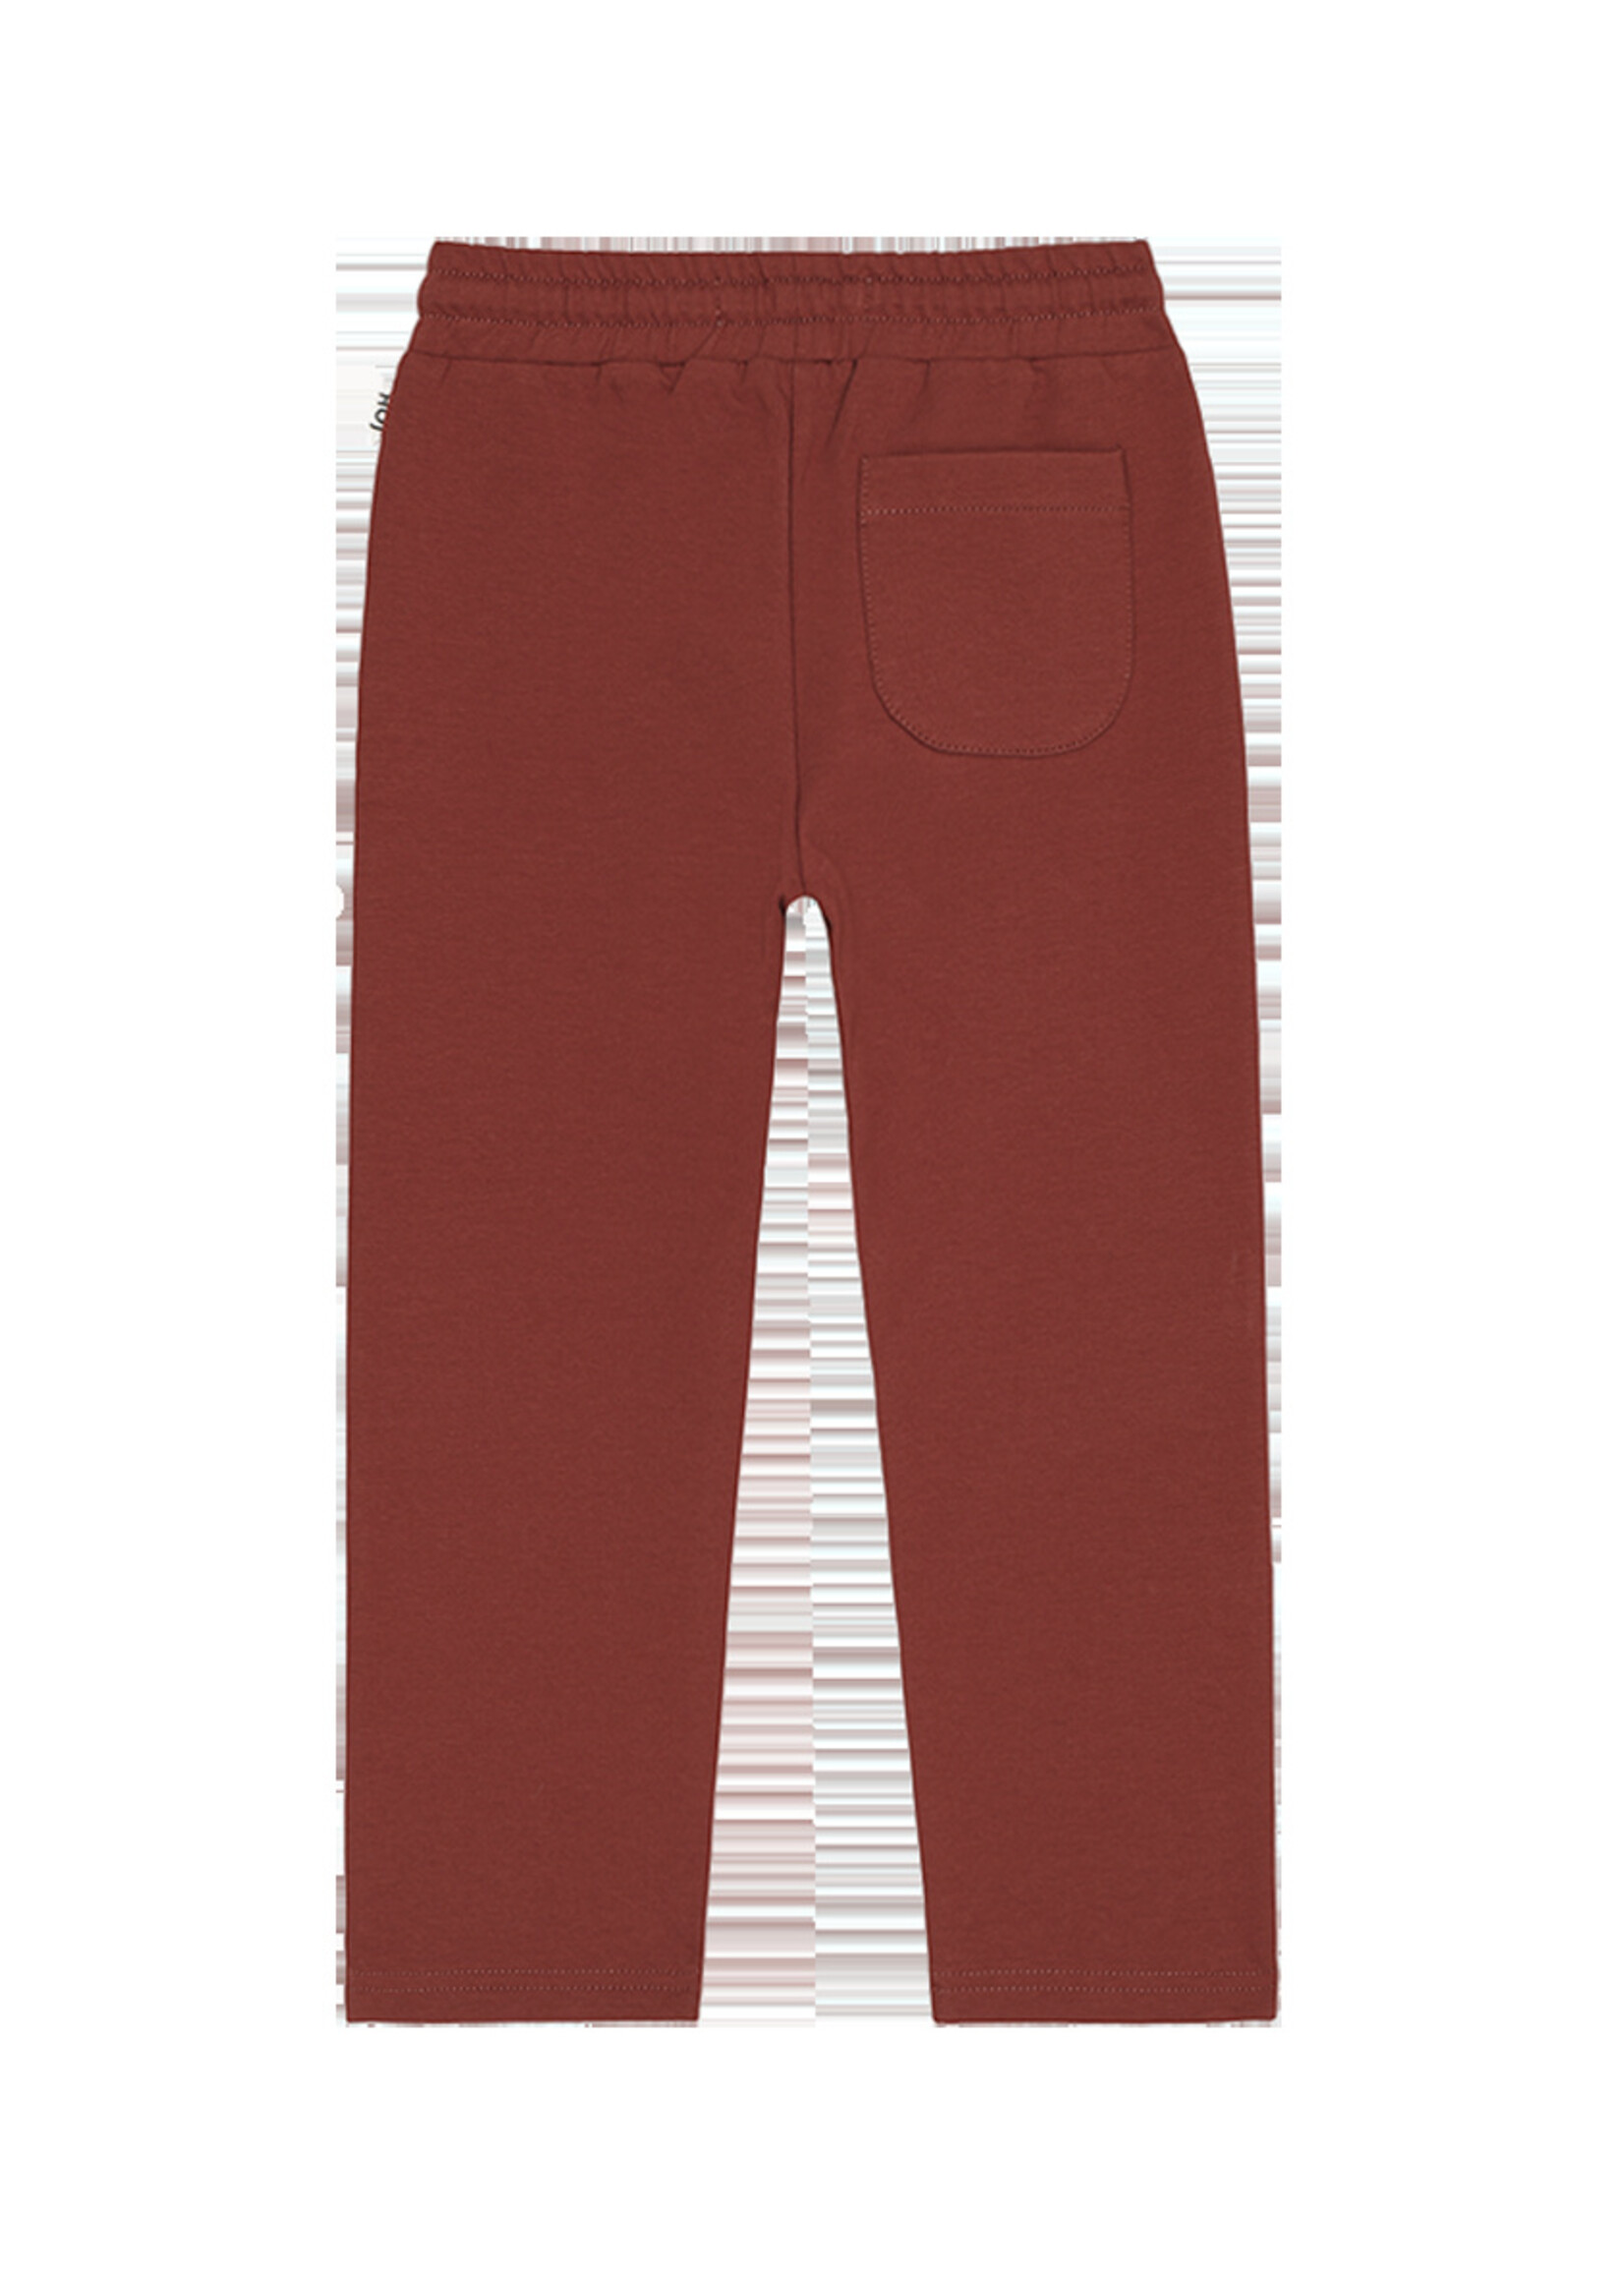 House of Jamie Joggers. Rustic Red